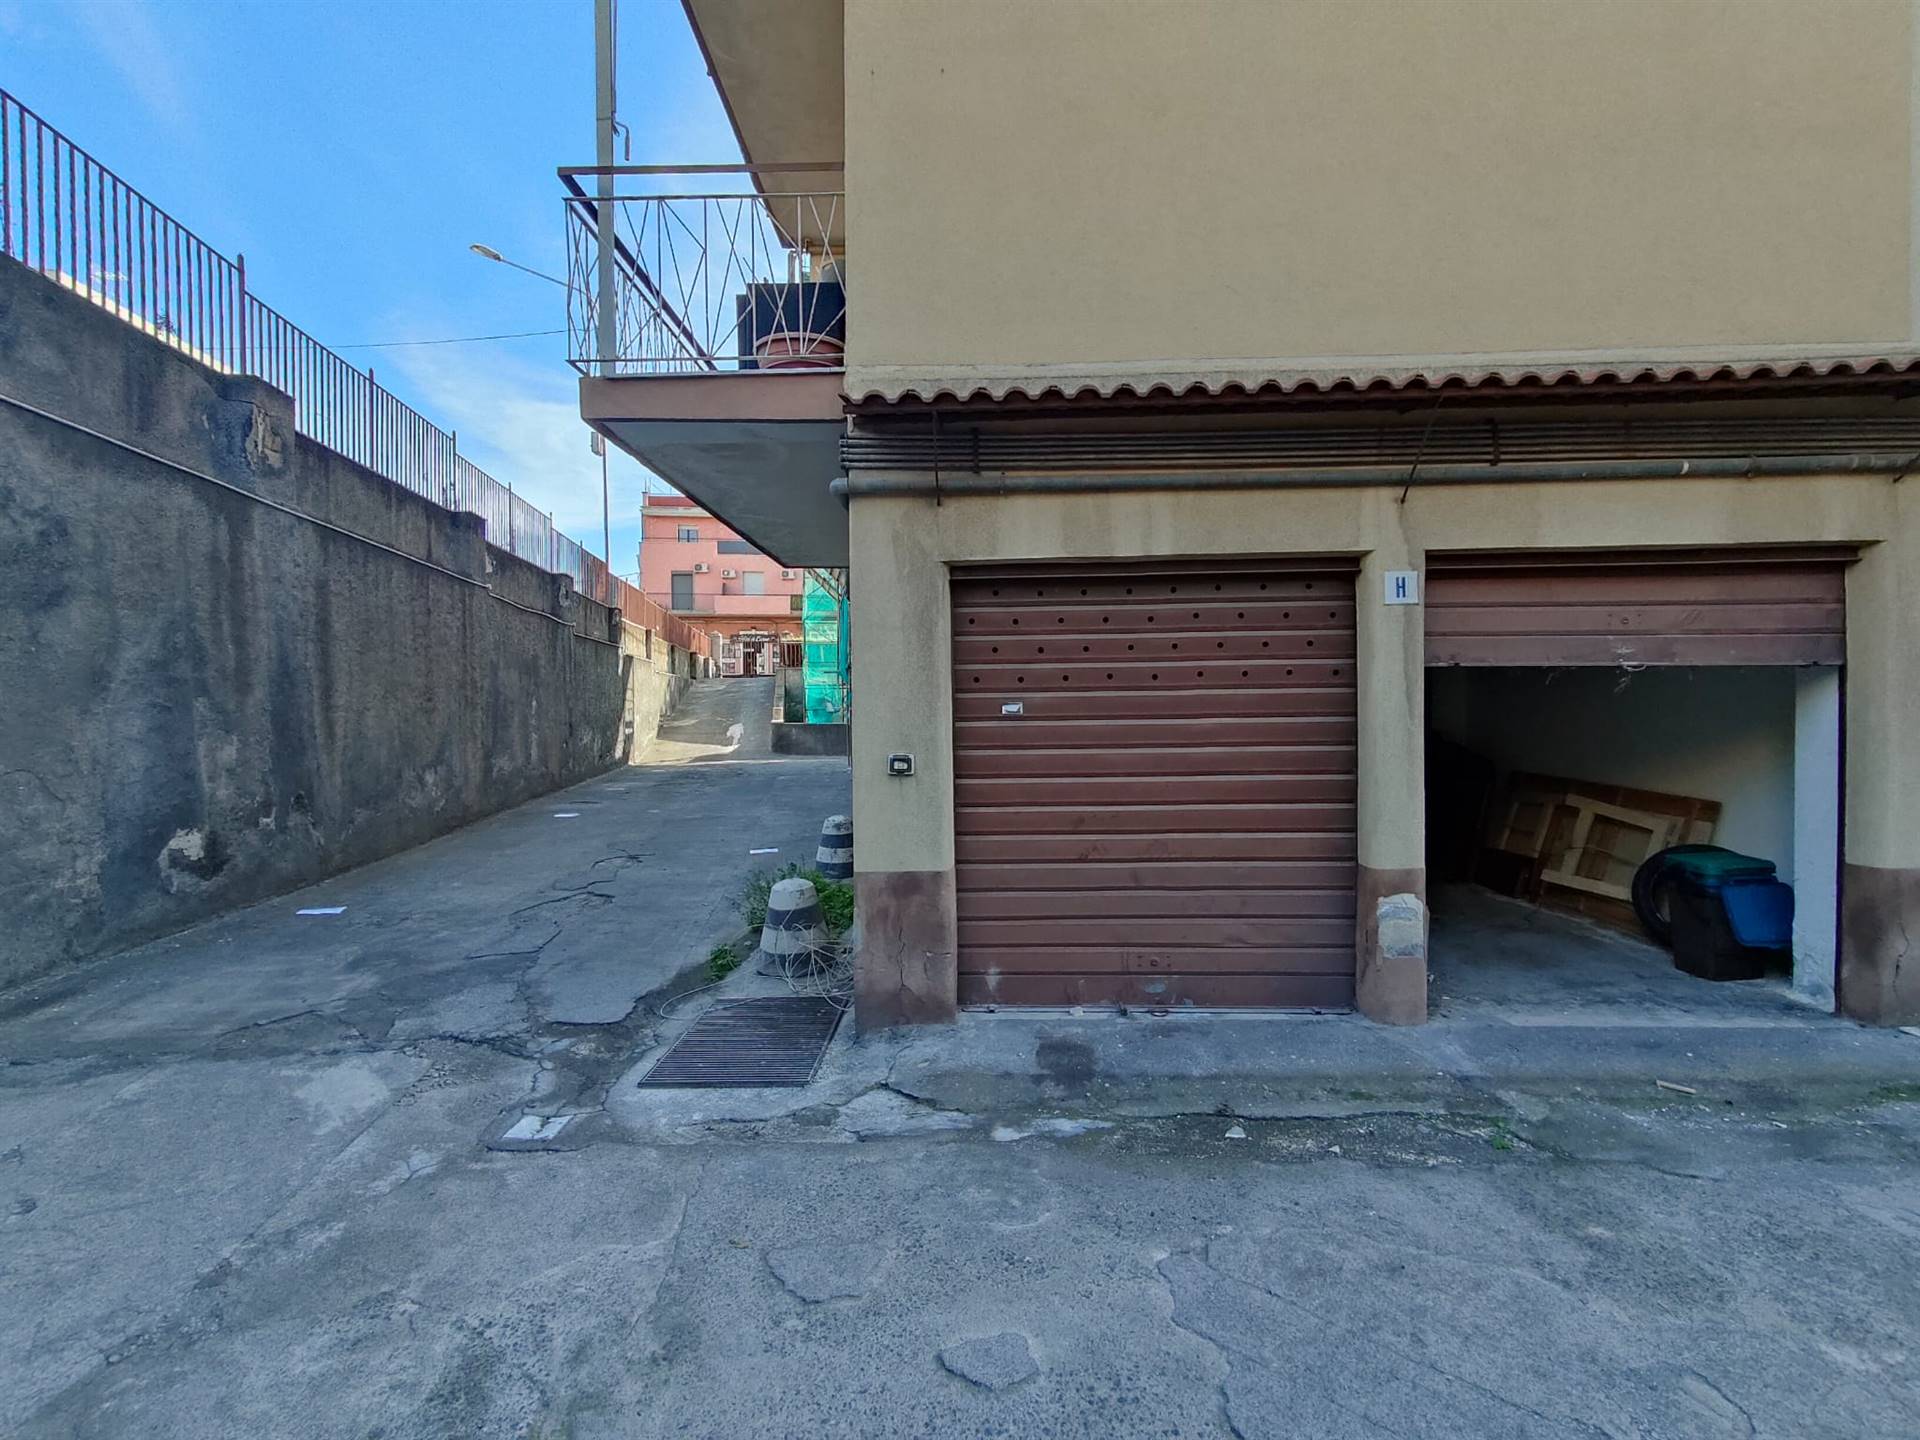 Garage / Parking space in CATANIA